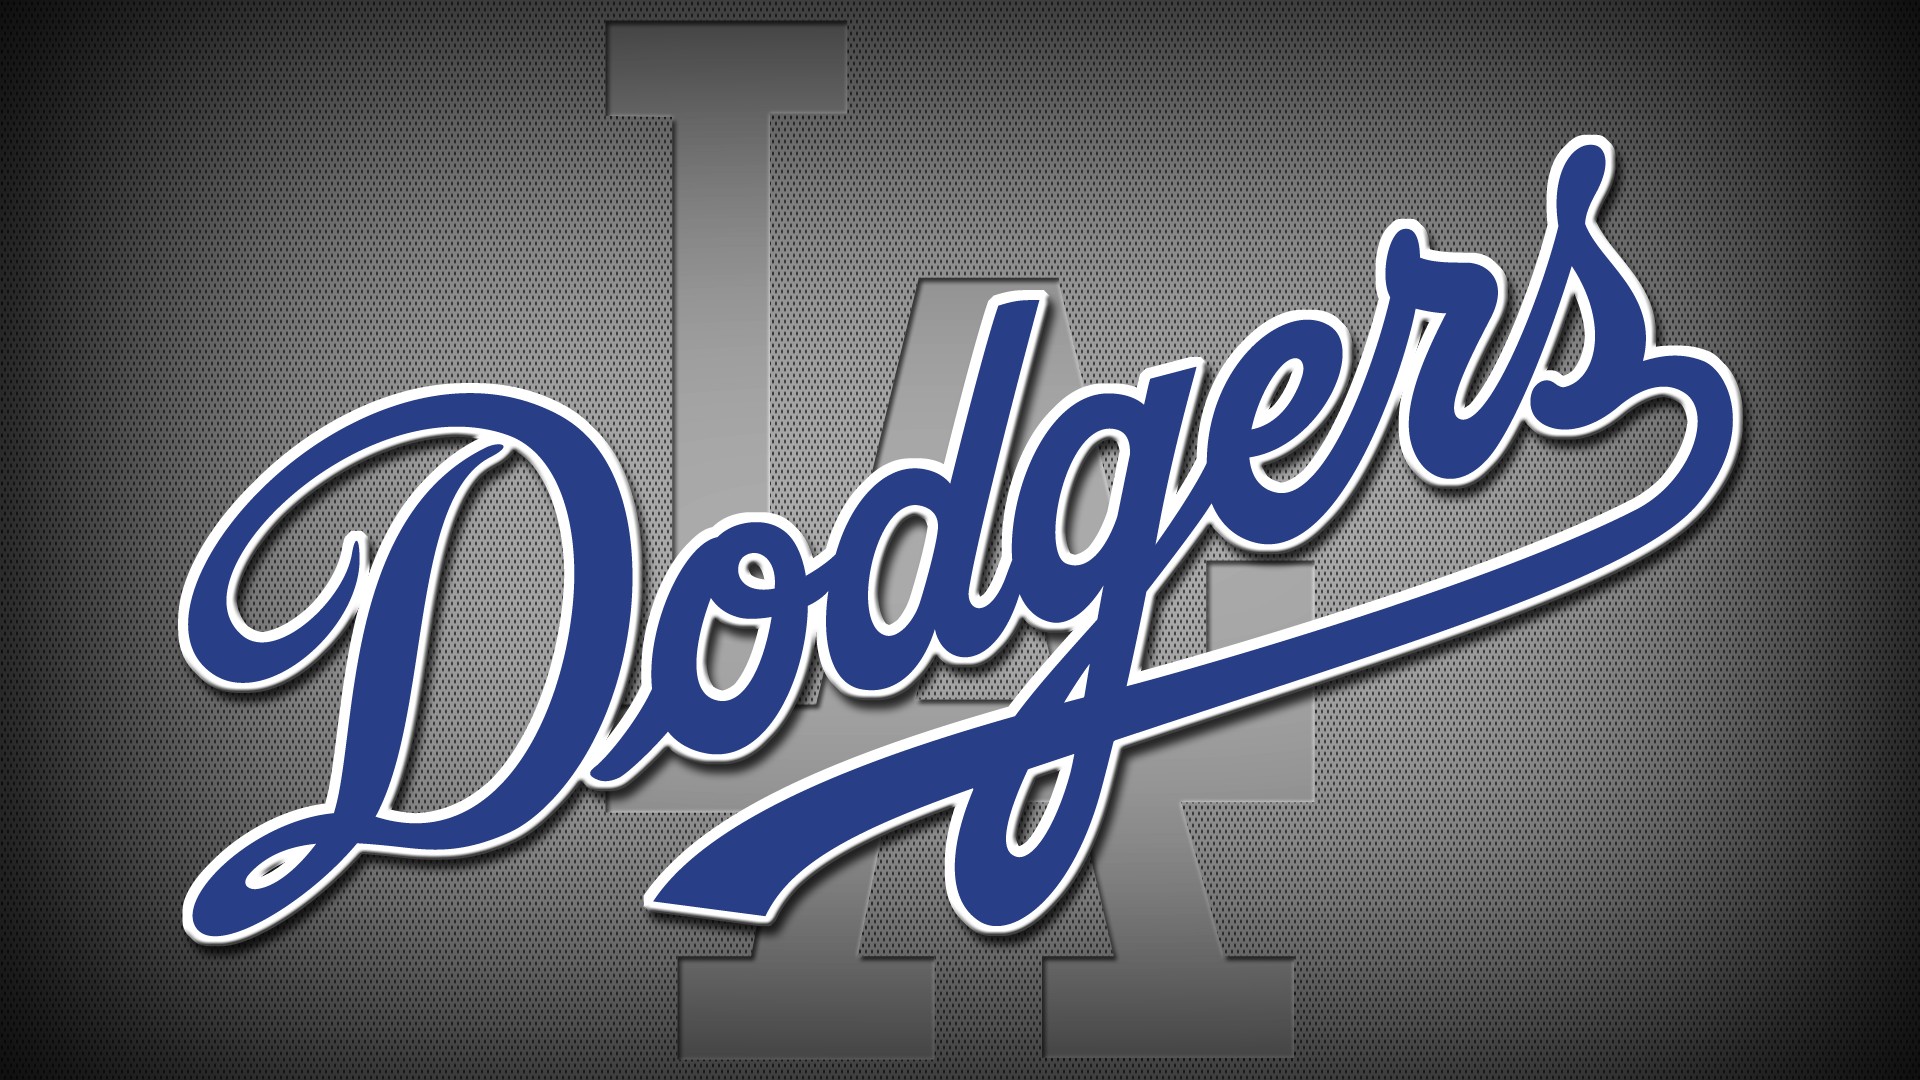 Los Angeles Dodgers MLB HD Wallpapers With high-resolution 1920X1080 pixel. You can use this wallpaper for Mac Desktop Wallpaper, Laptop Screensavers, Android Wallpapers, Tablet or iPhone Home Screen and another mobile phone device